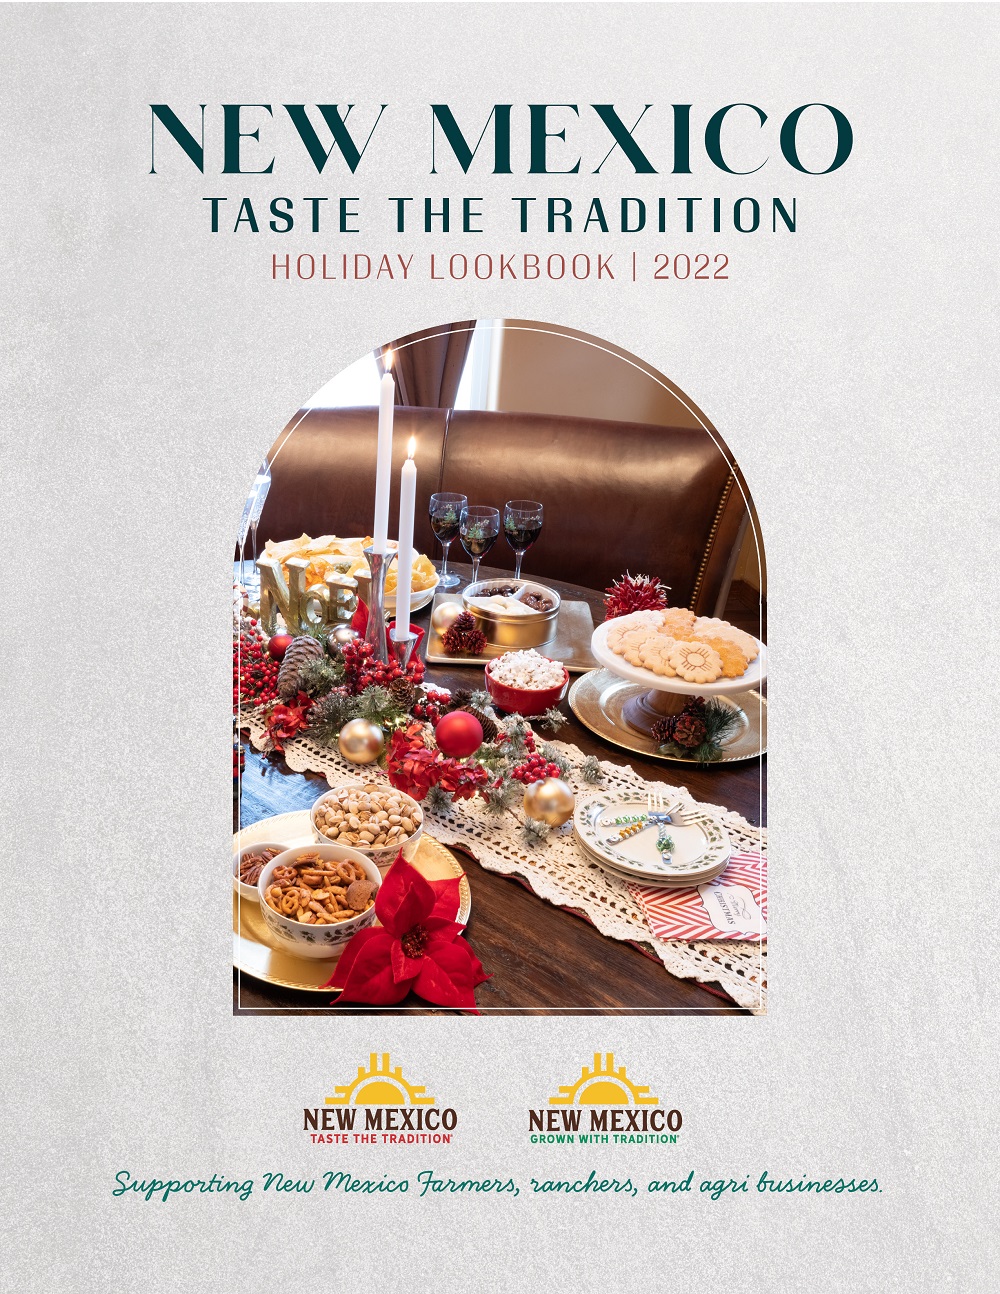 New Mexico Taste the Tradition is in big, green letters at the top of the photo. Beneath it reads Holiday Lookbook 2022 in red letters, followed by a cropped image of a Christmas dining table. The New Mexico – Taste the Tradition/Grown with Tradition logos can be found beneath the red font. Under the logos is a green text that reads Supporting New Mexico farmers, ranchers and agri-businesses. 